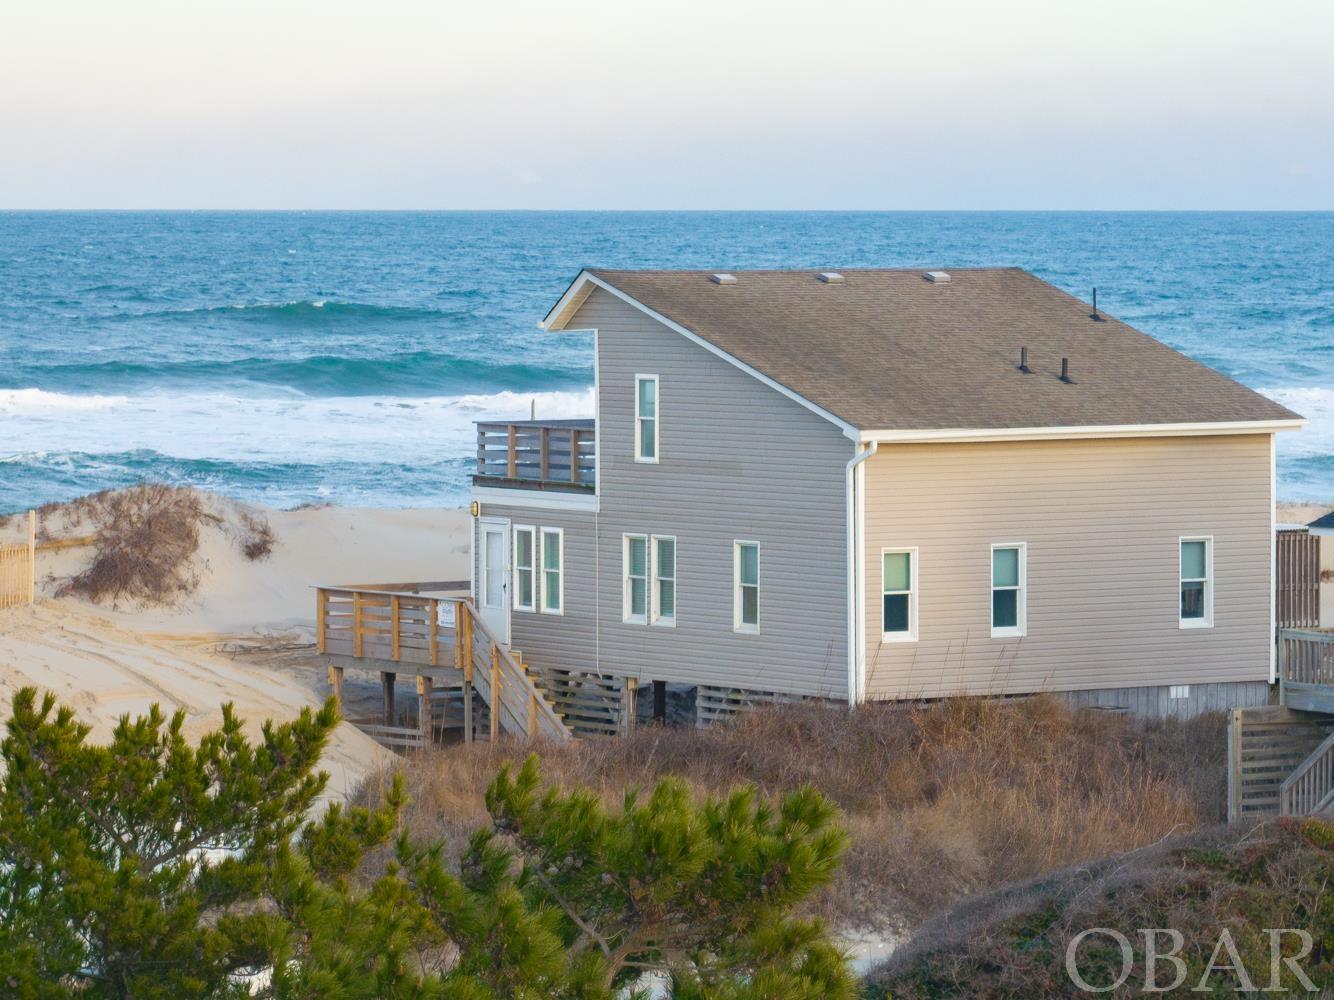 Enjoy everything quaint South Nags Head has to offer in this oceanfront cottage. Located behind a protective dune, this property does not lack views. The first floor includes a spacious living room, dining area, kitchen, two bedrooms, and a hall bath. Upstairs you will find two additional bedrooms, one ensuite, and a private upper deck with panoramic views. This home does not lack outdoor living space with generous decking on the first floor perfect for sharing a meal, just hanging out, or enjoy a refreshing outdoor shower. The home has a great rental history projected to do at or above $80,000 in 2024. Located adjacent to a lifeguard stand in the summer months.